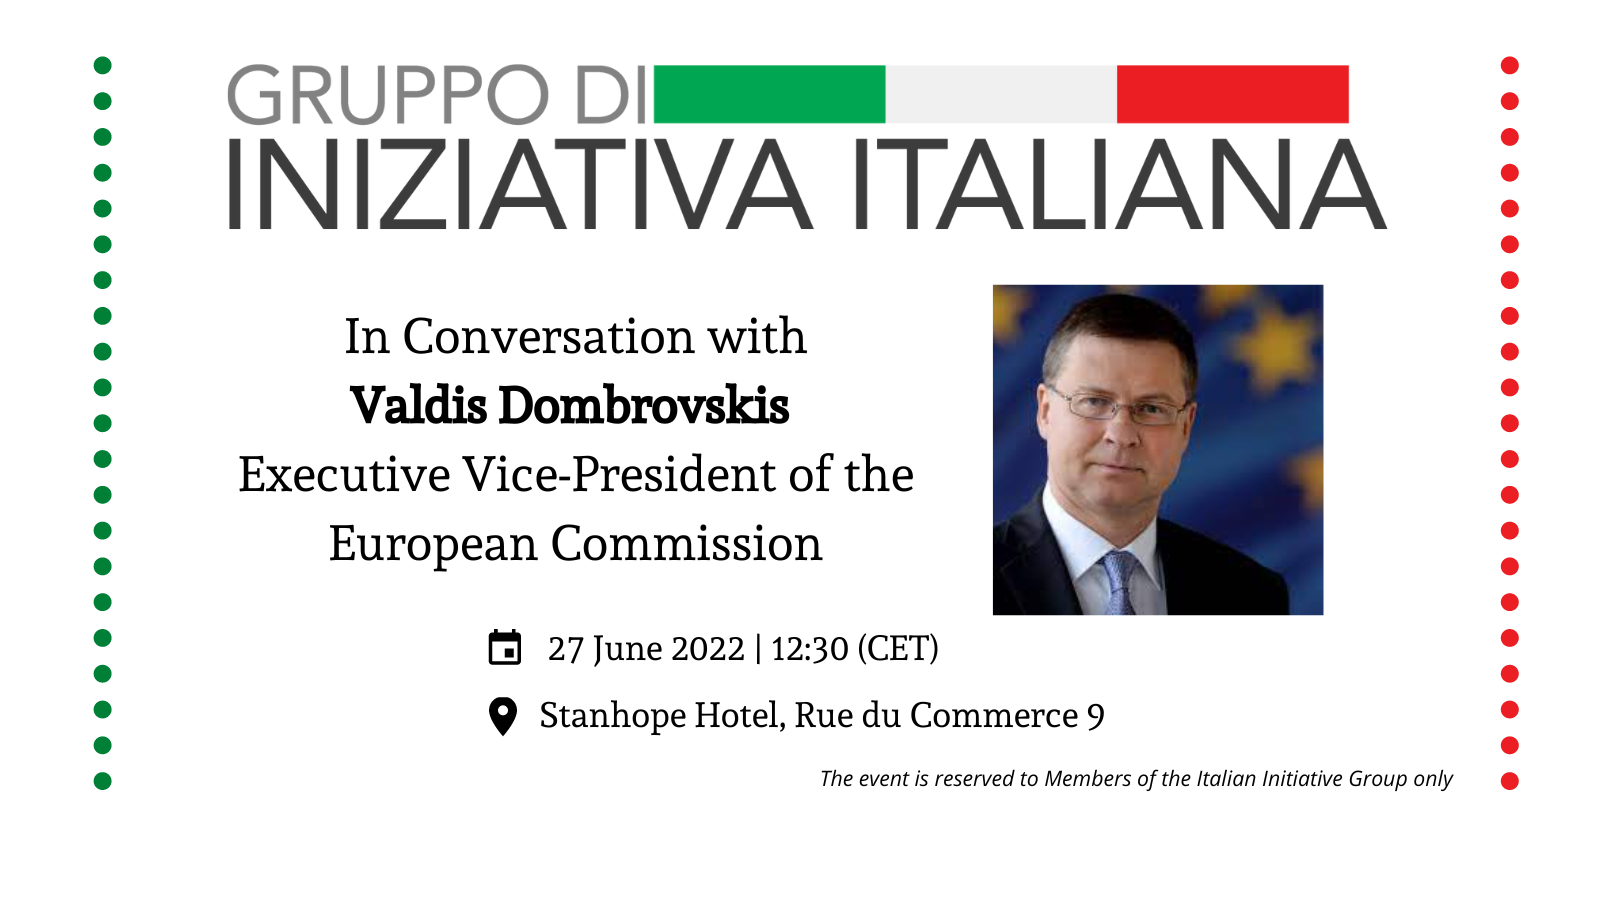 In conversation with Valdis Dombrovskis | Executive Vice-President of the European Commission